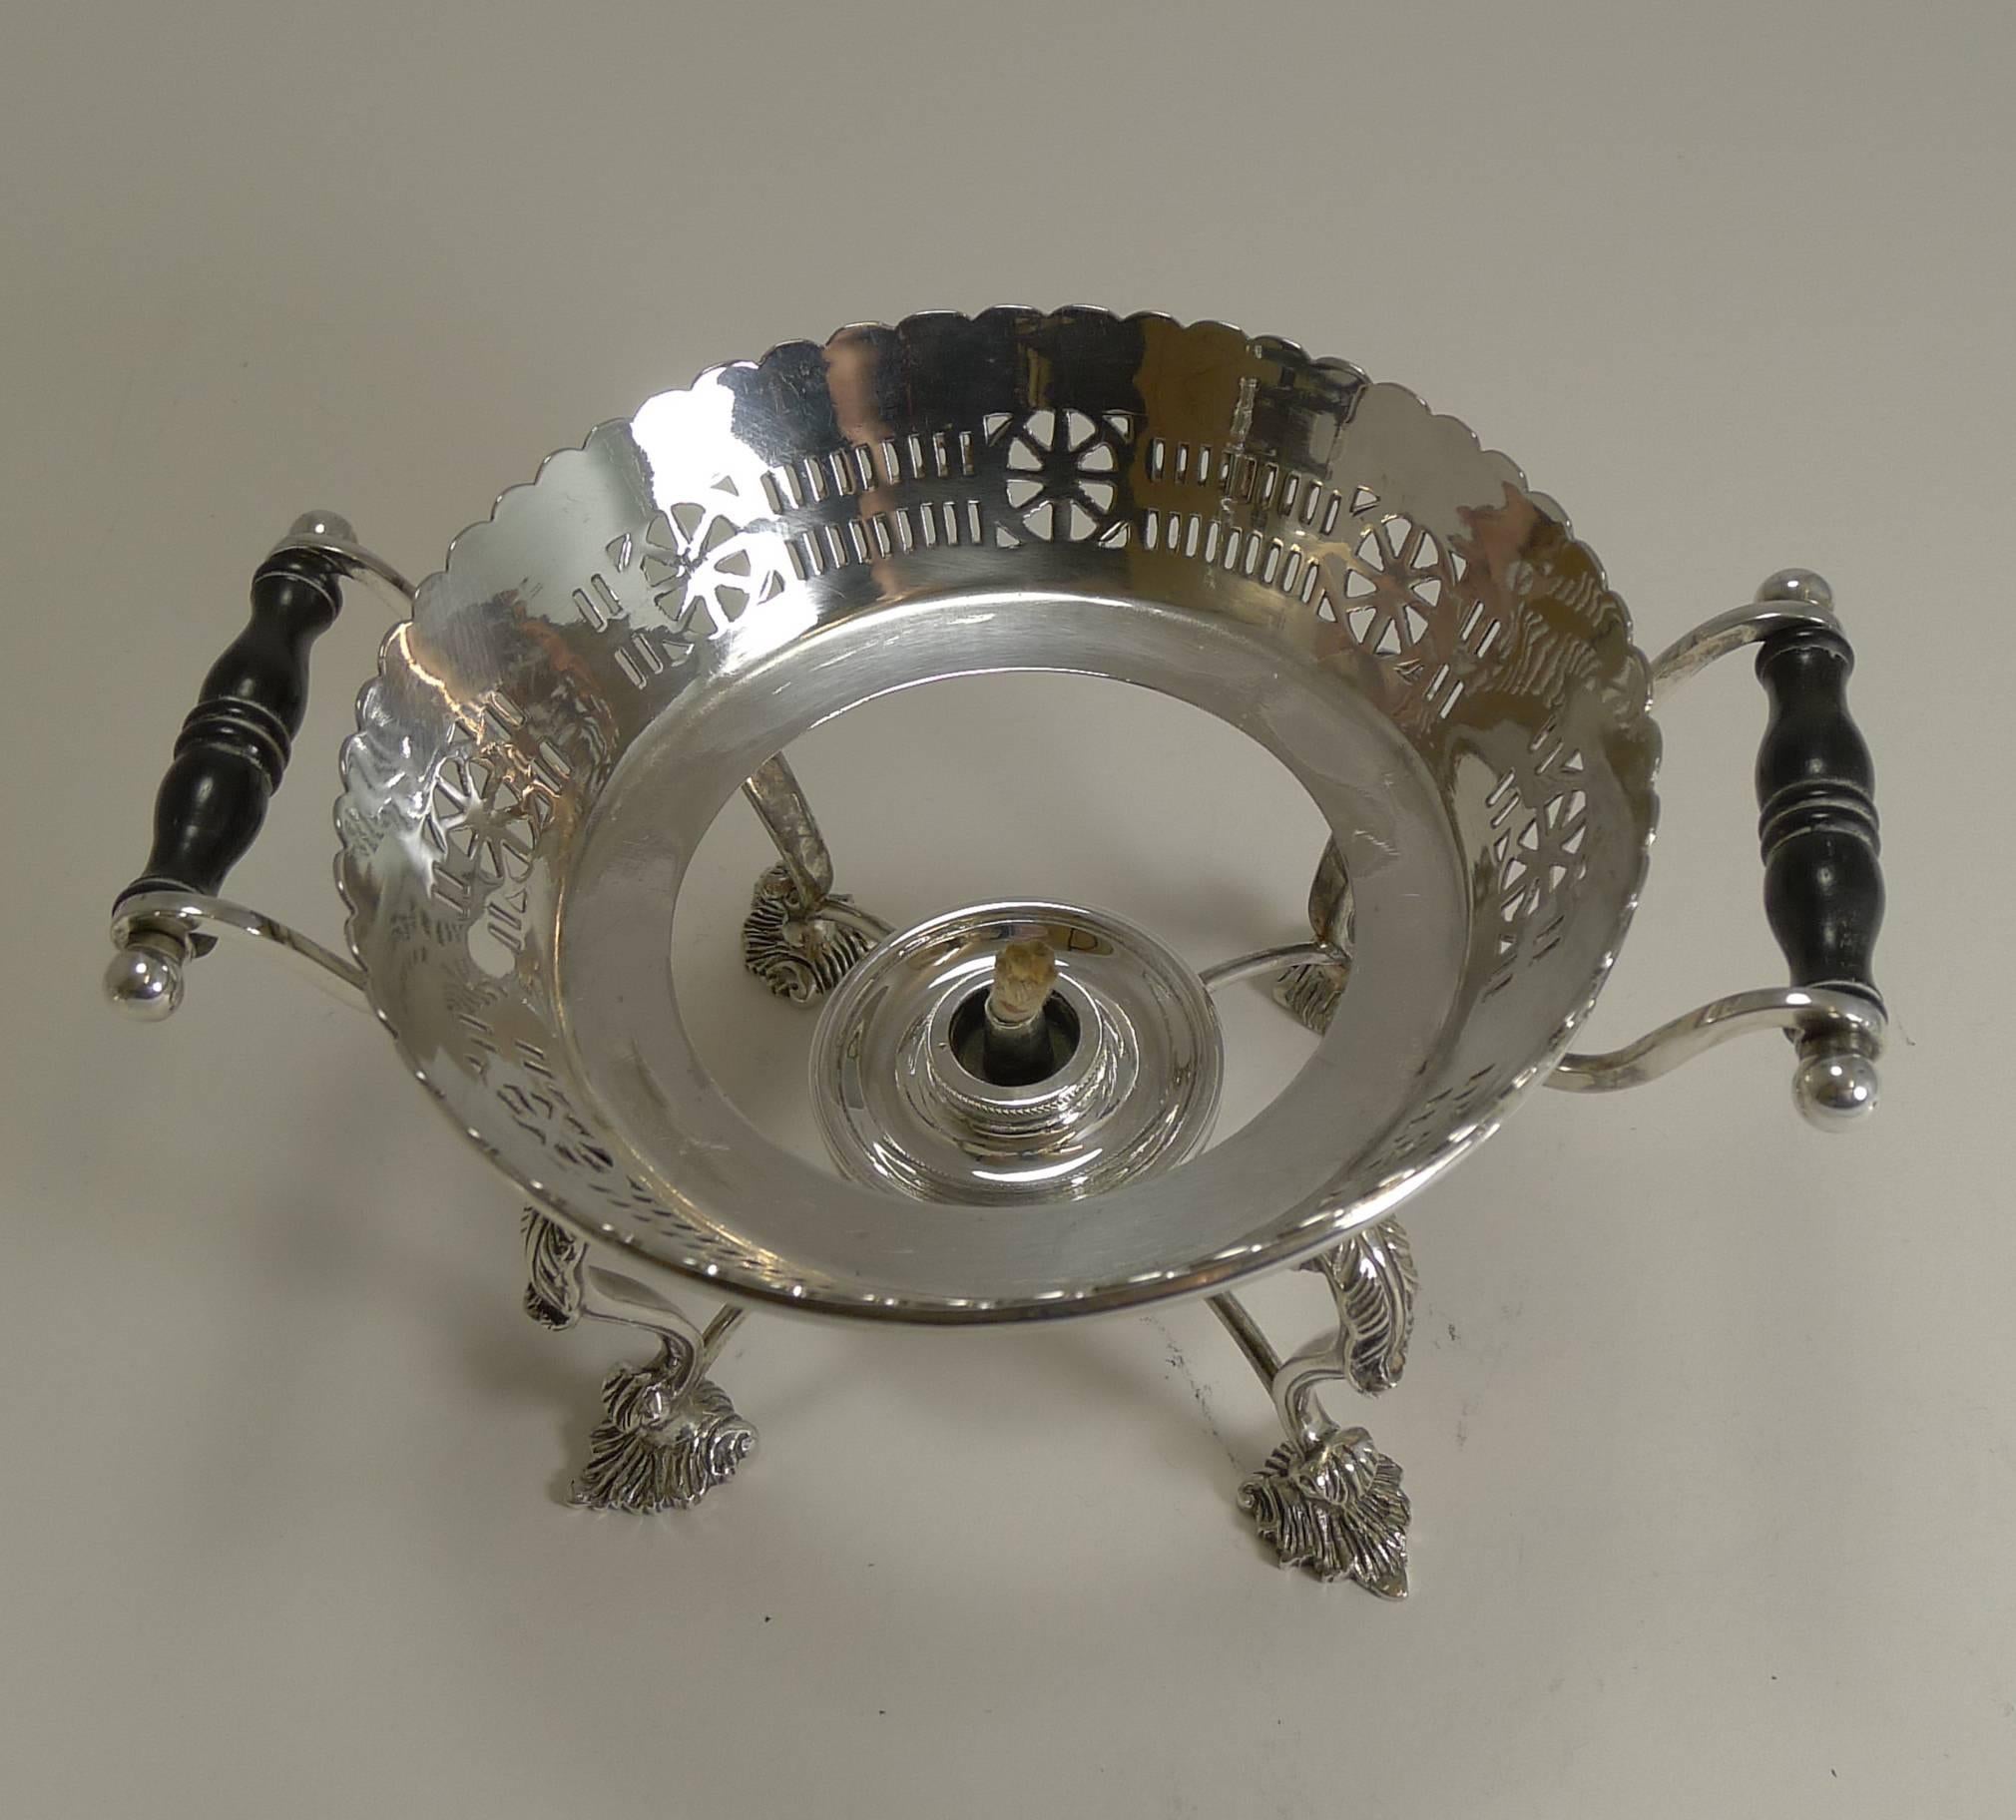 Early 20th Century Antique Silver Plated Kettle on Stand by Martin Hall, 1900